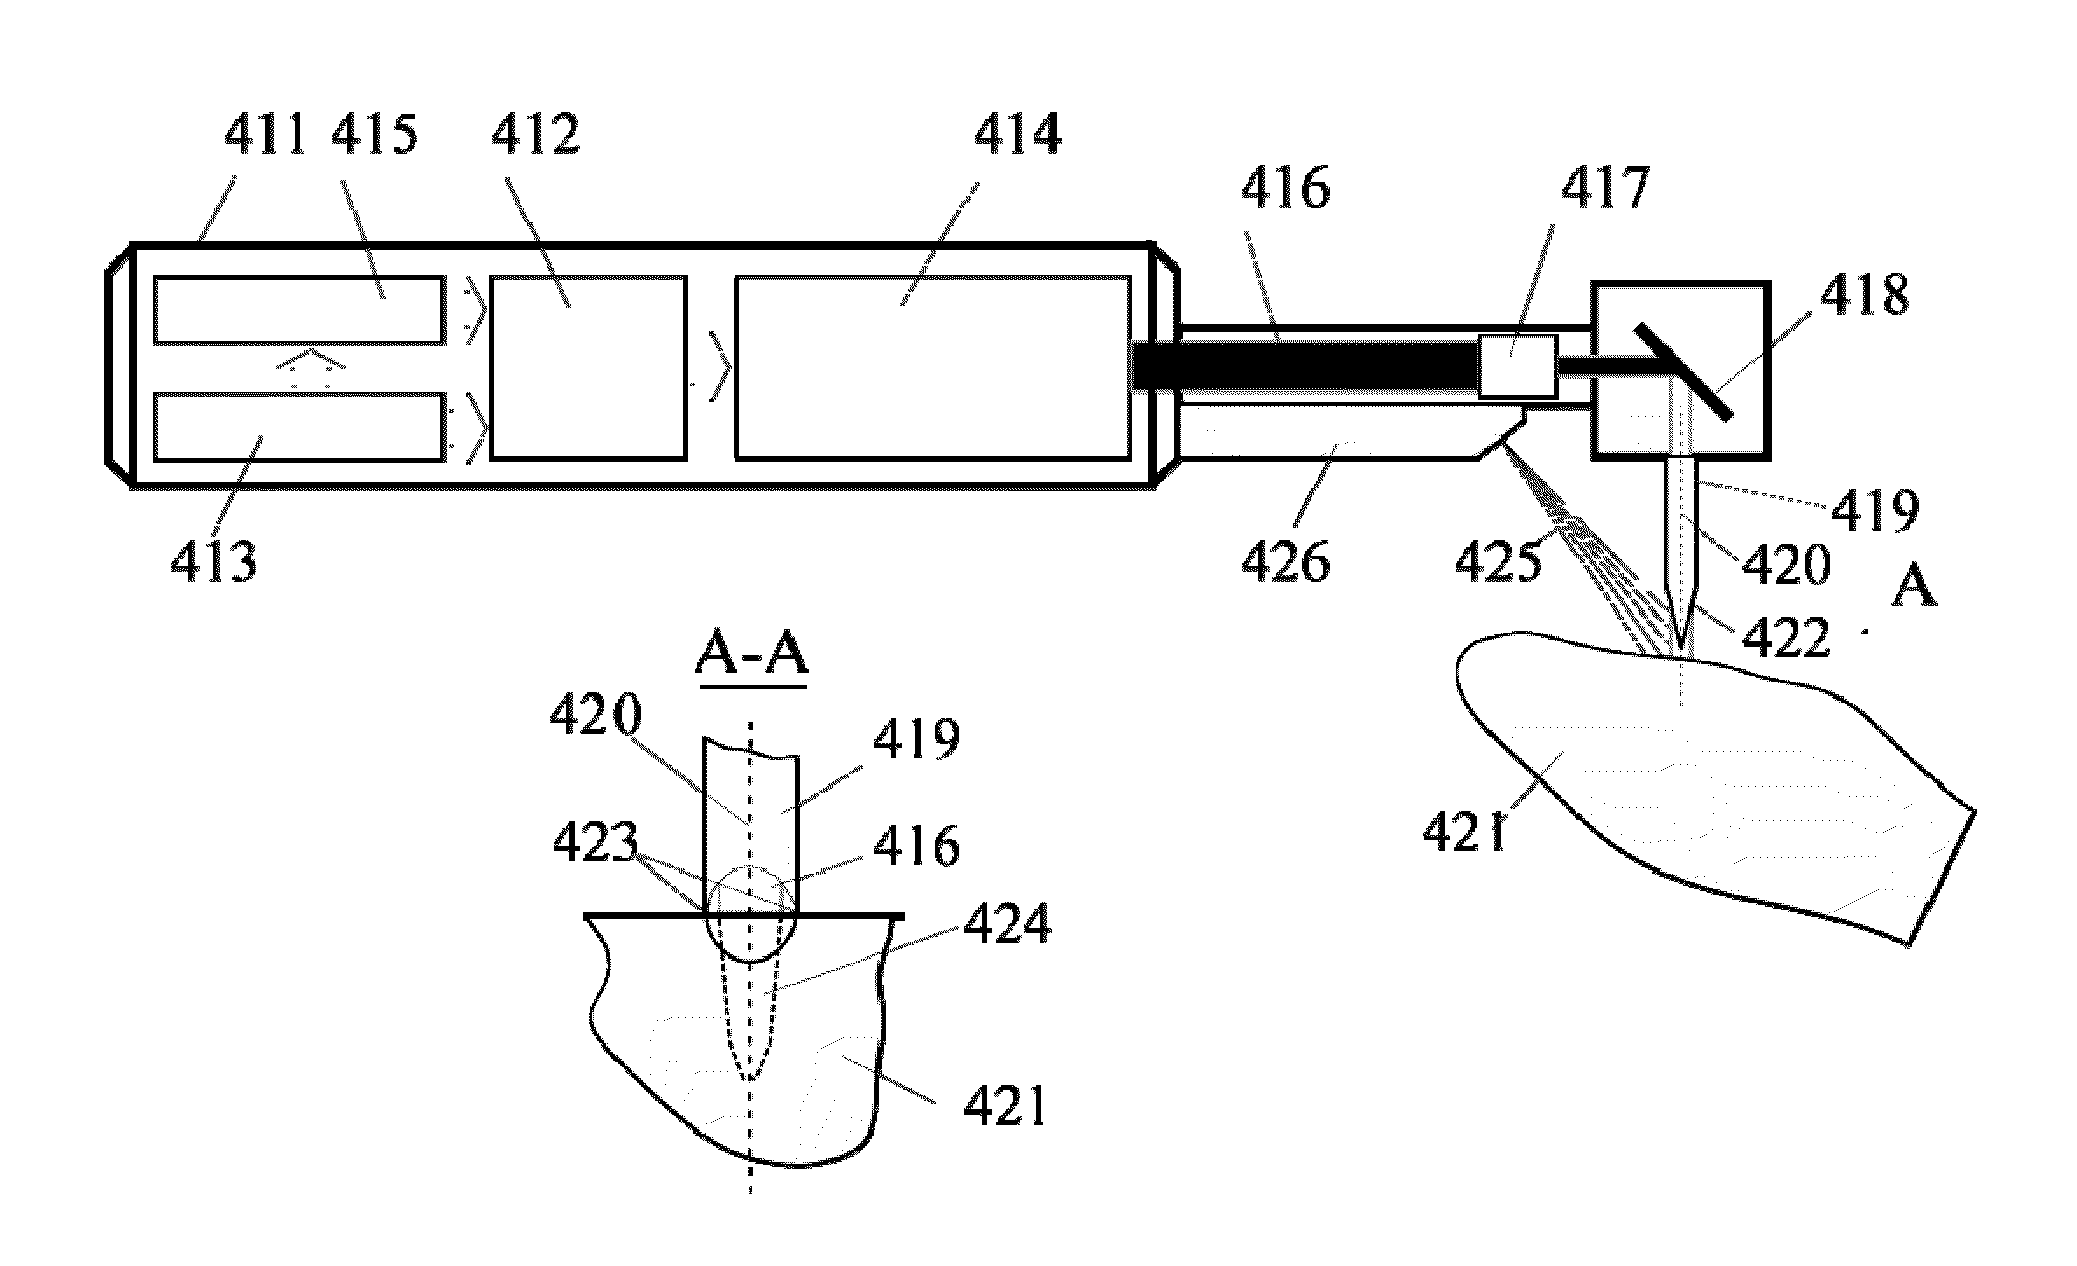 Method and apparatus for diagnostic and treatment using hard tissue or material microperforation